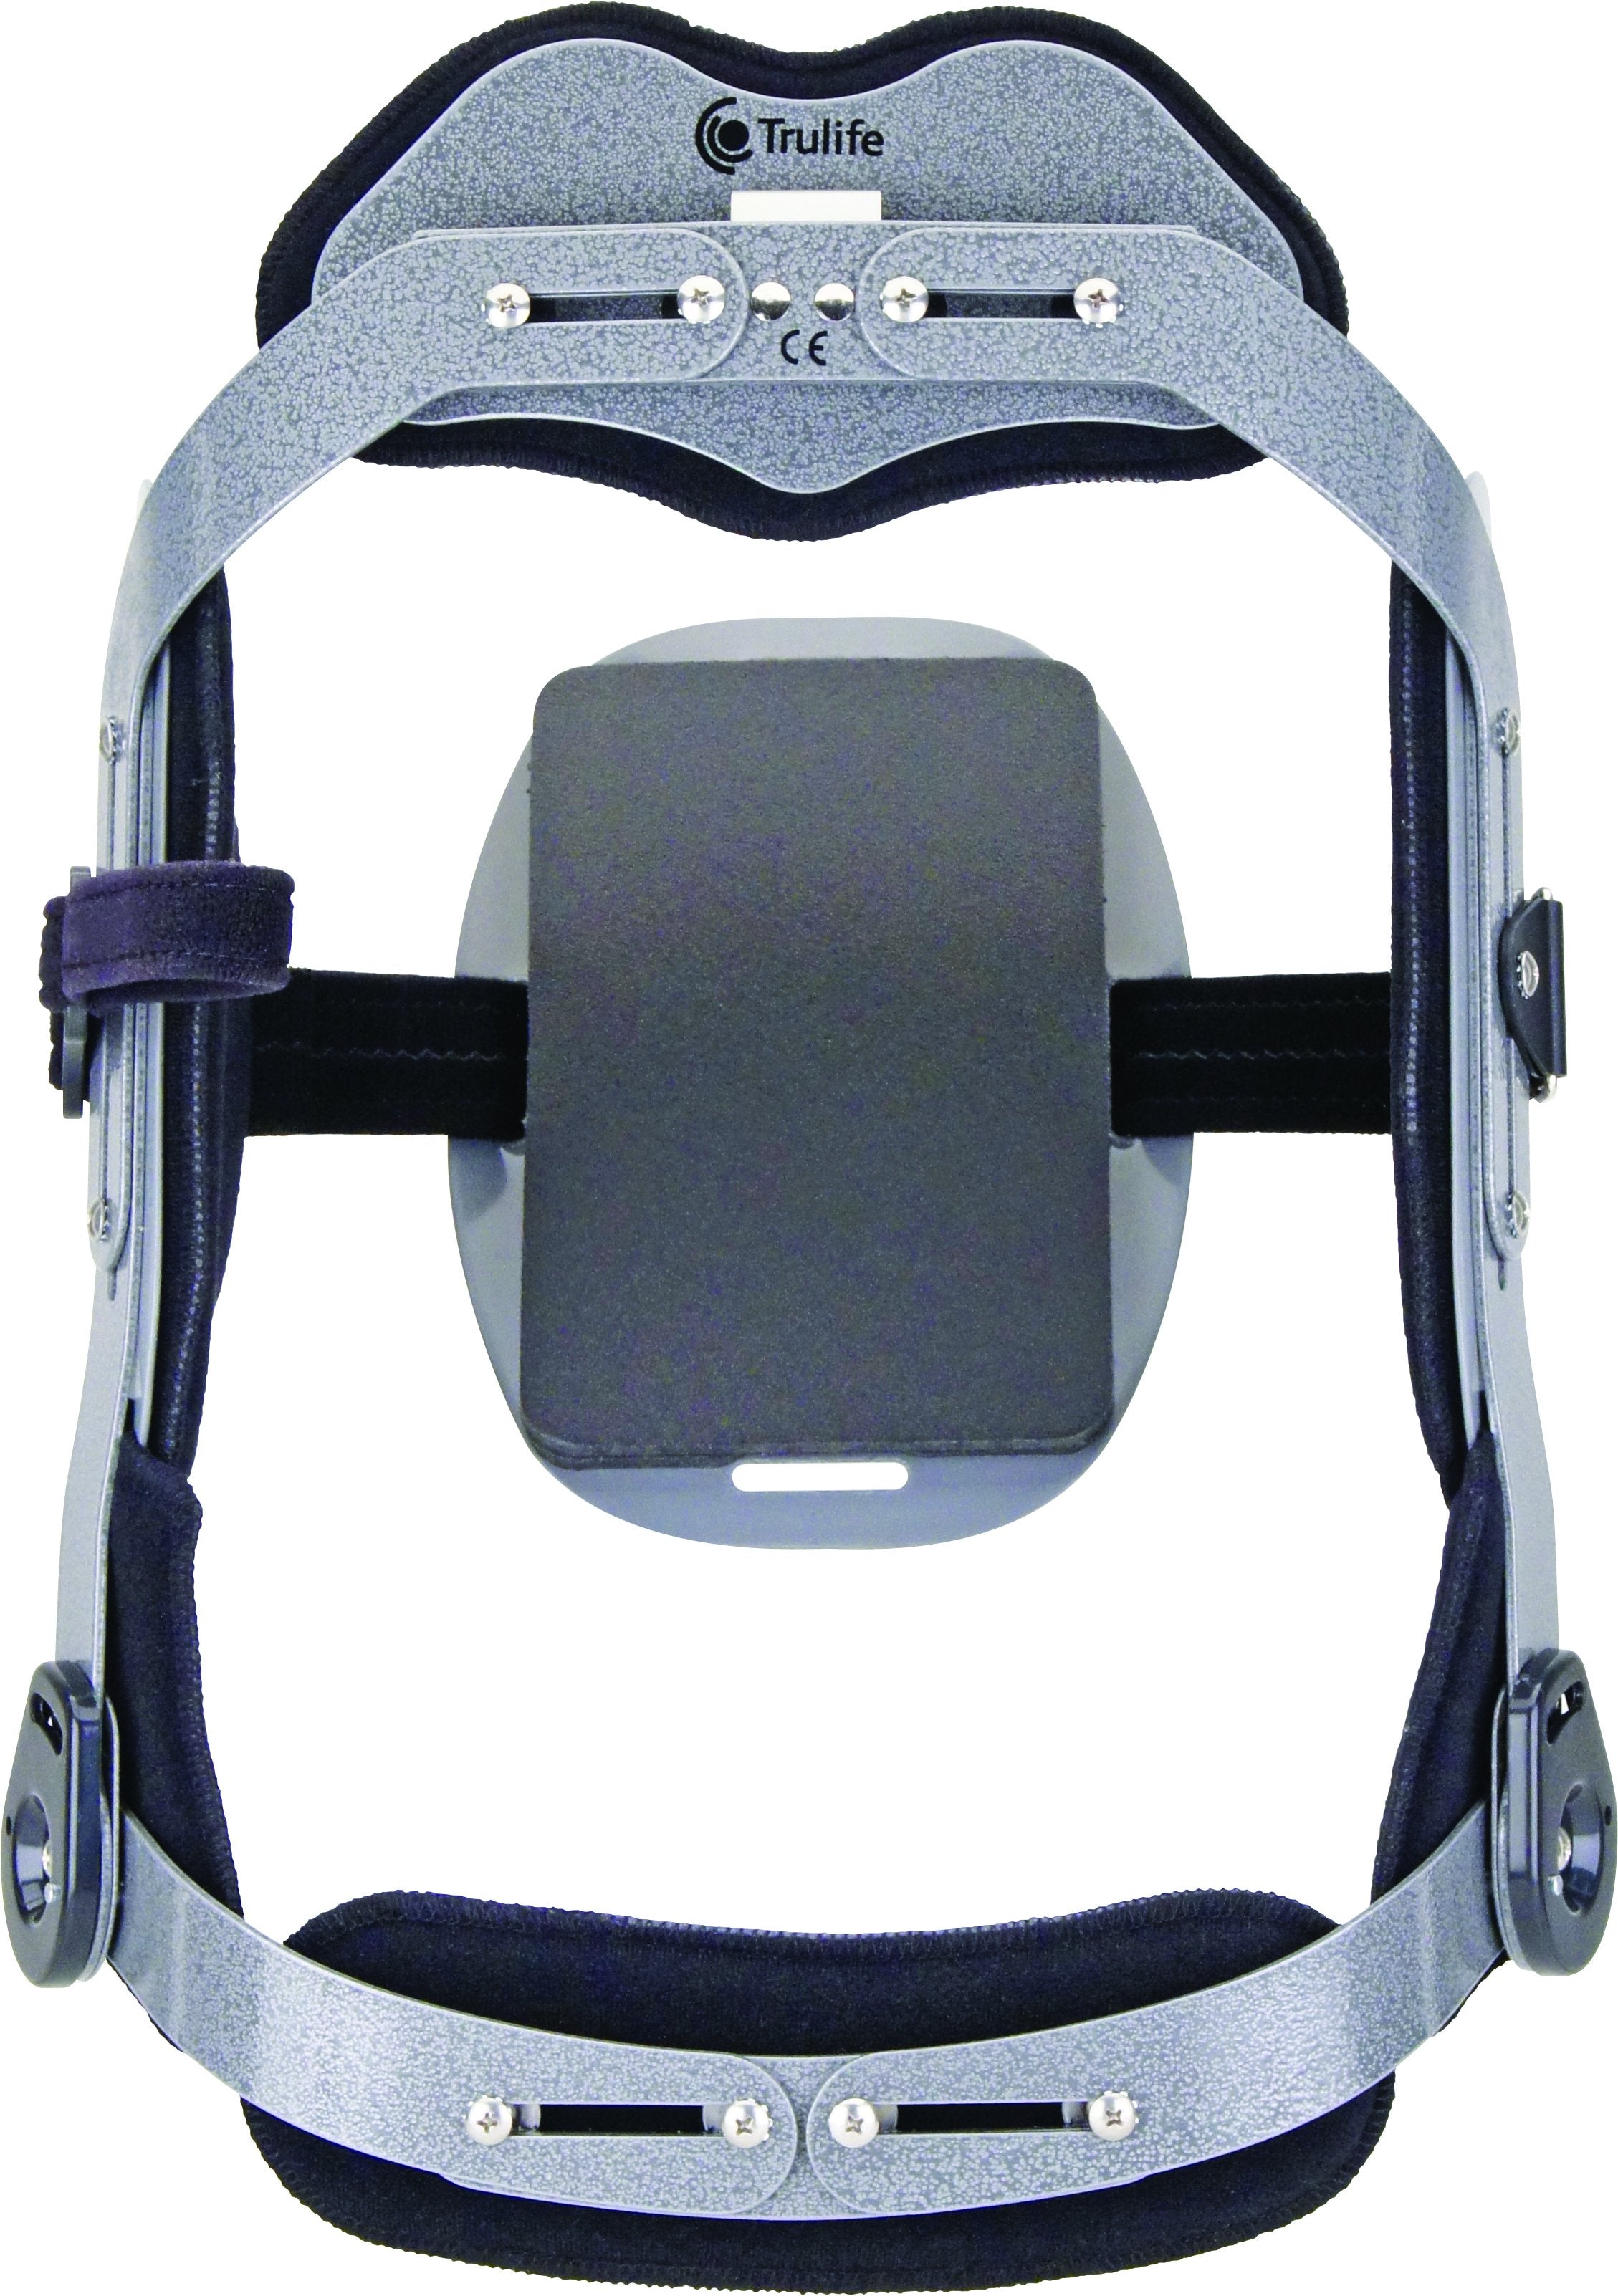 T39 Hyperextension Orthosis with Articulating, Adjustable Pelvic Band